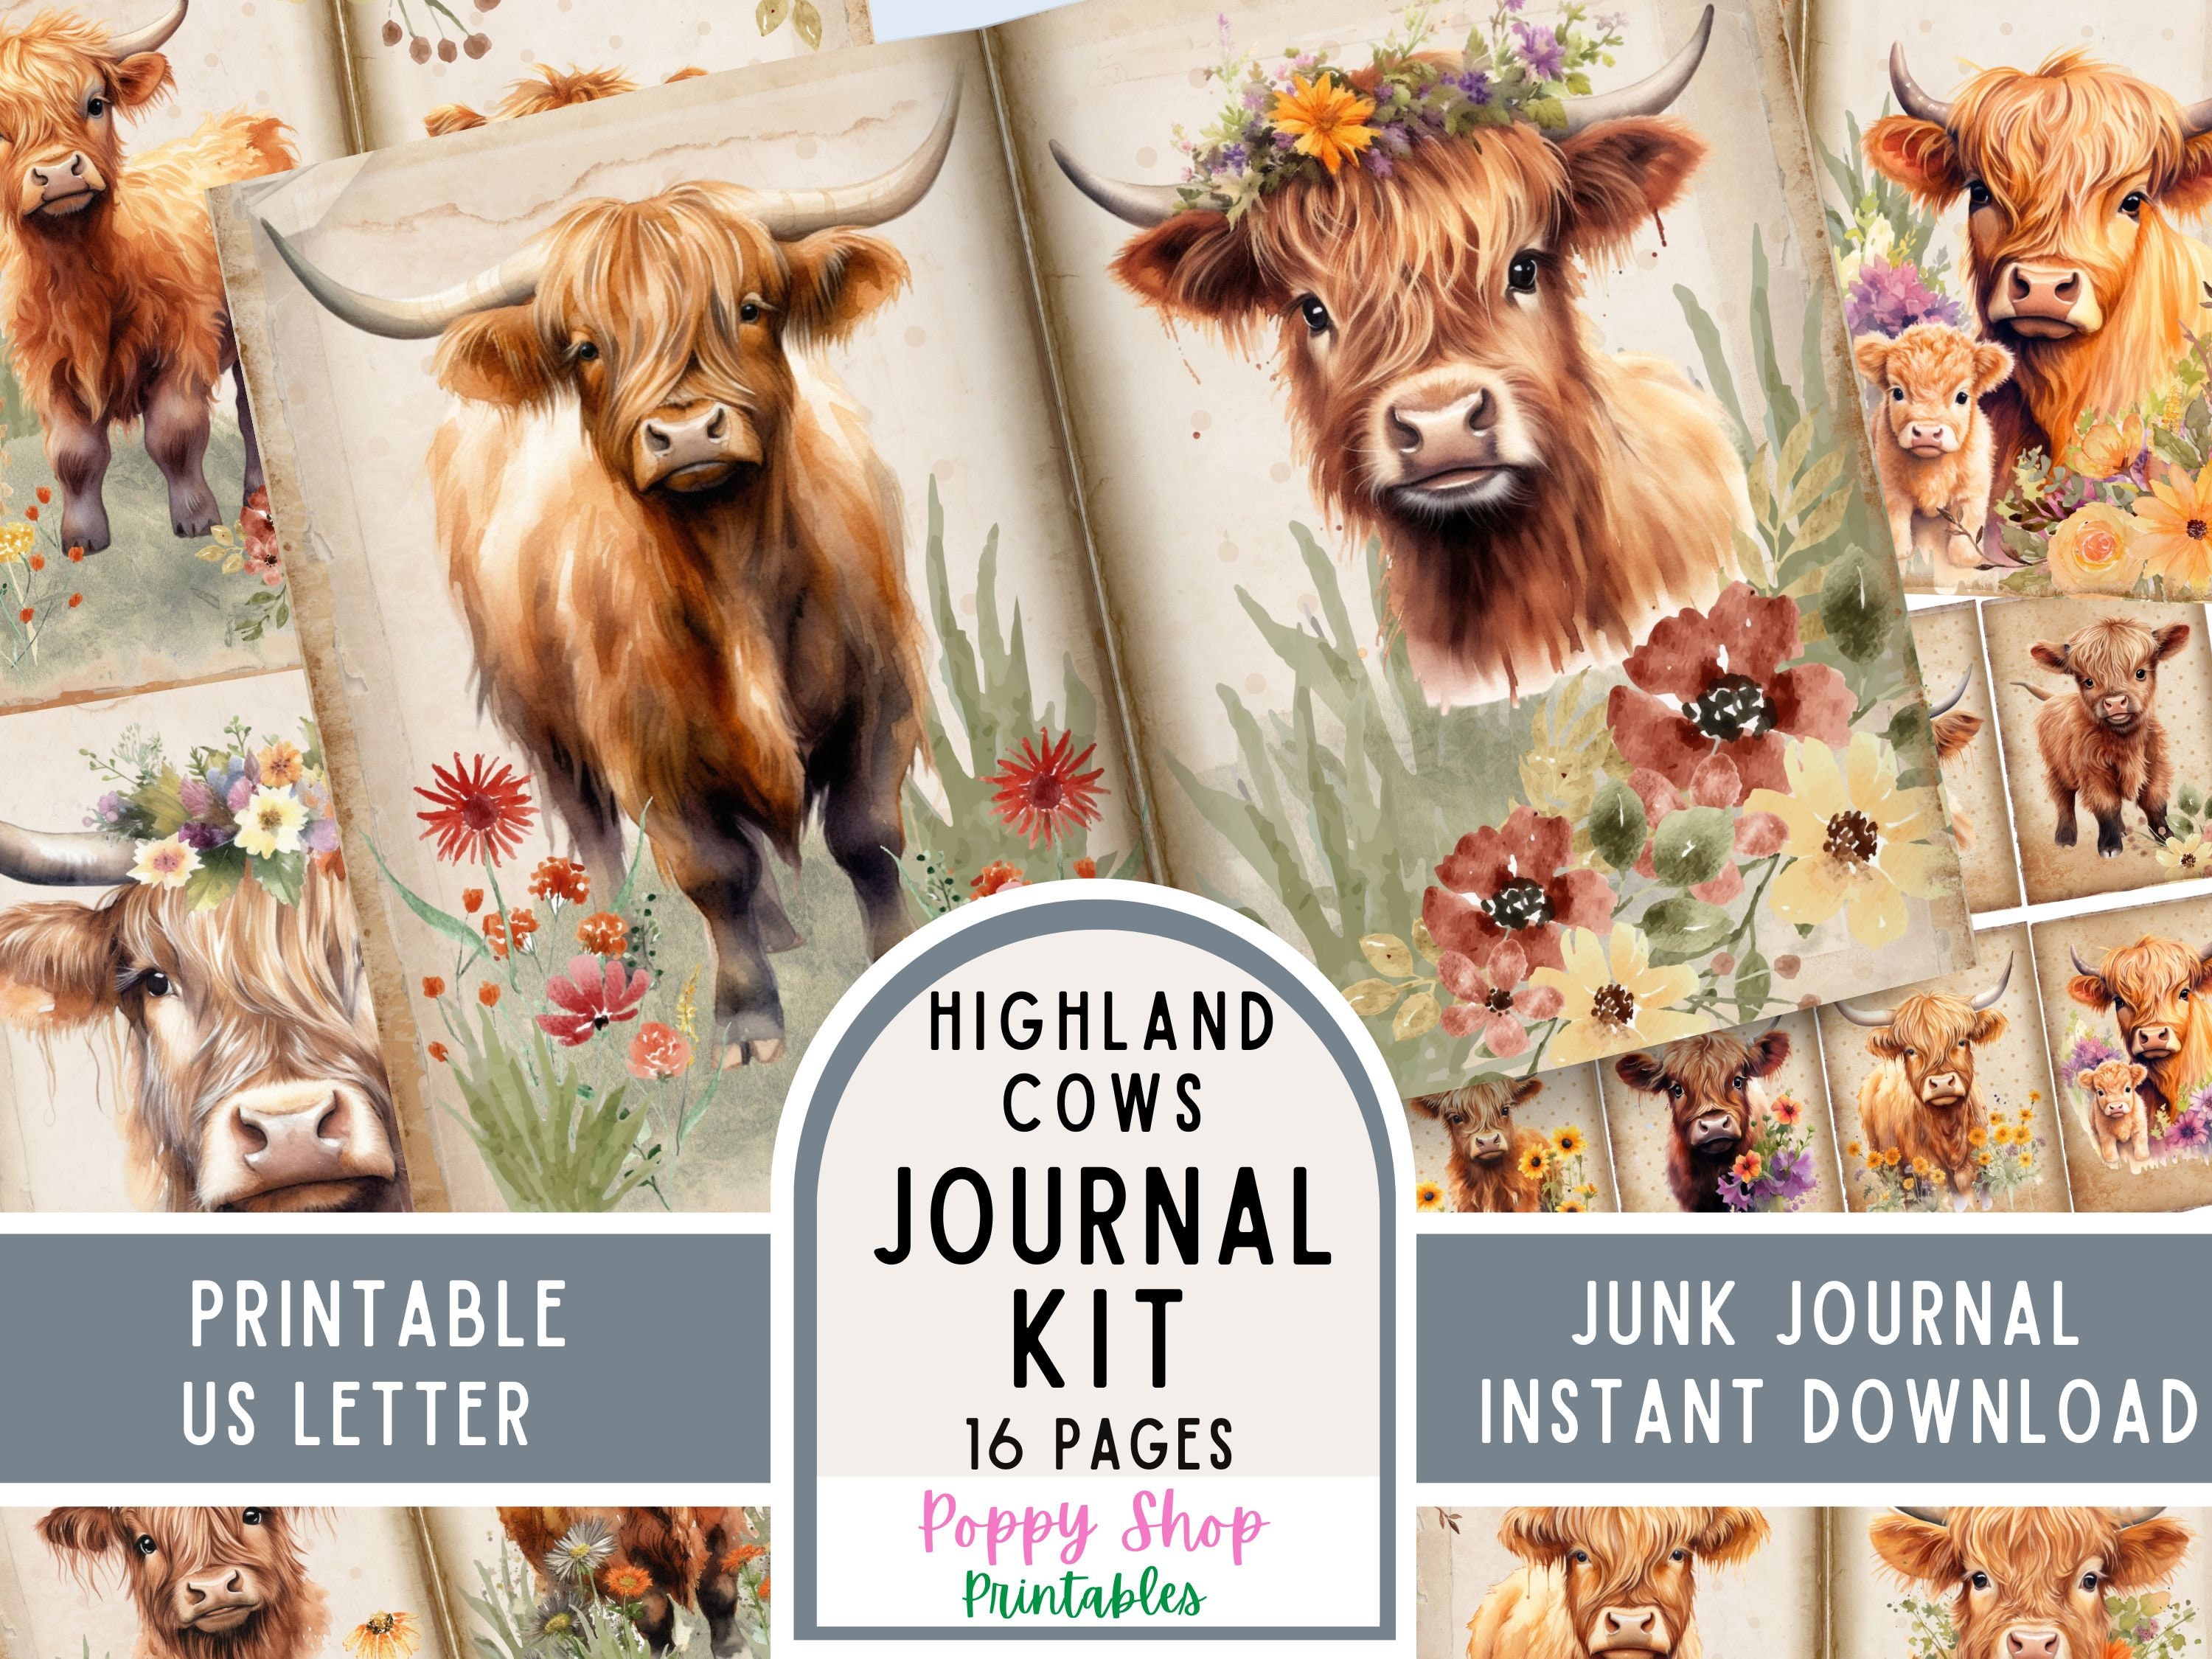 DIY Paint Party Kit Instant Download, Includes Tracer, Instructions, Supply  List,farm, Animal, Kids Art, Highland Cow Sunflower, 